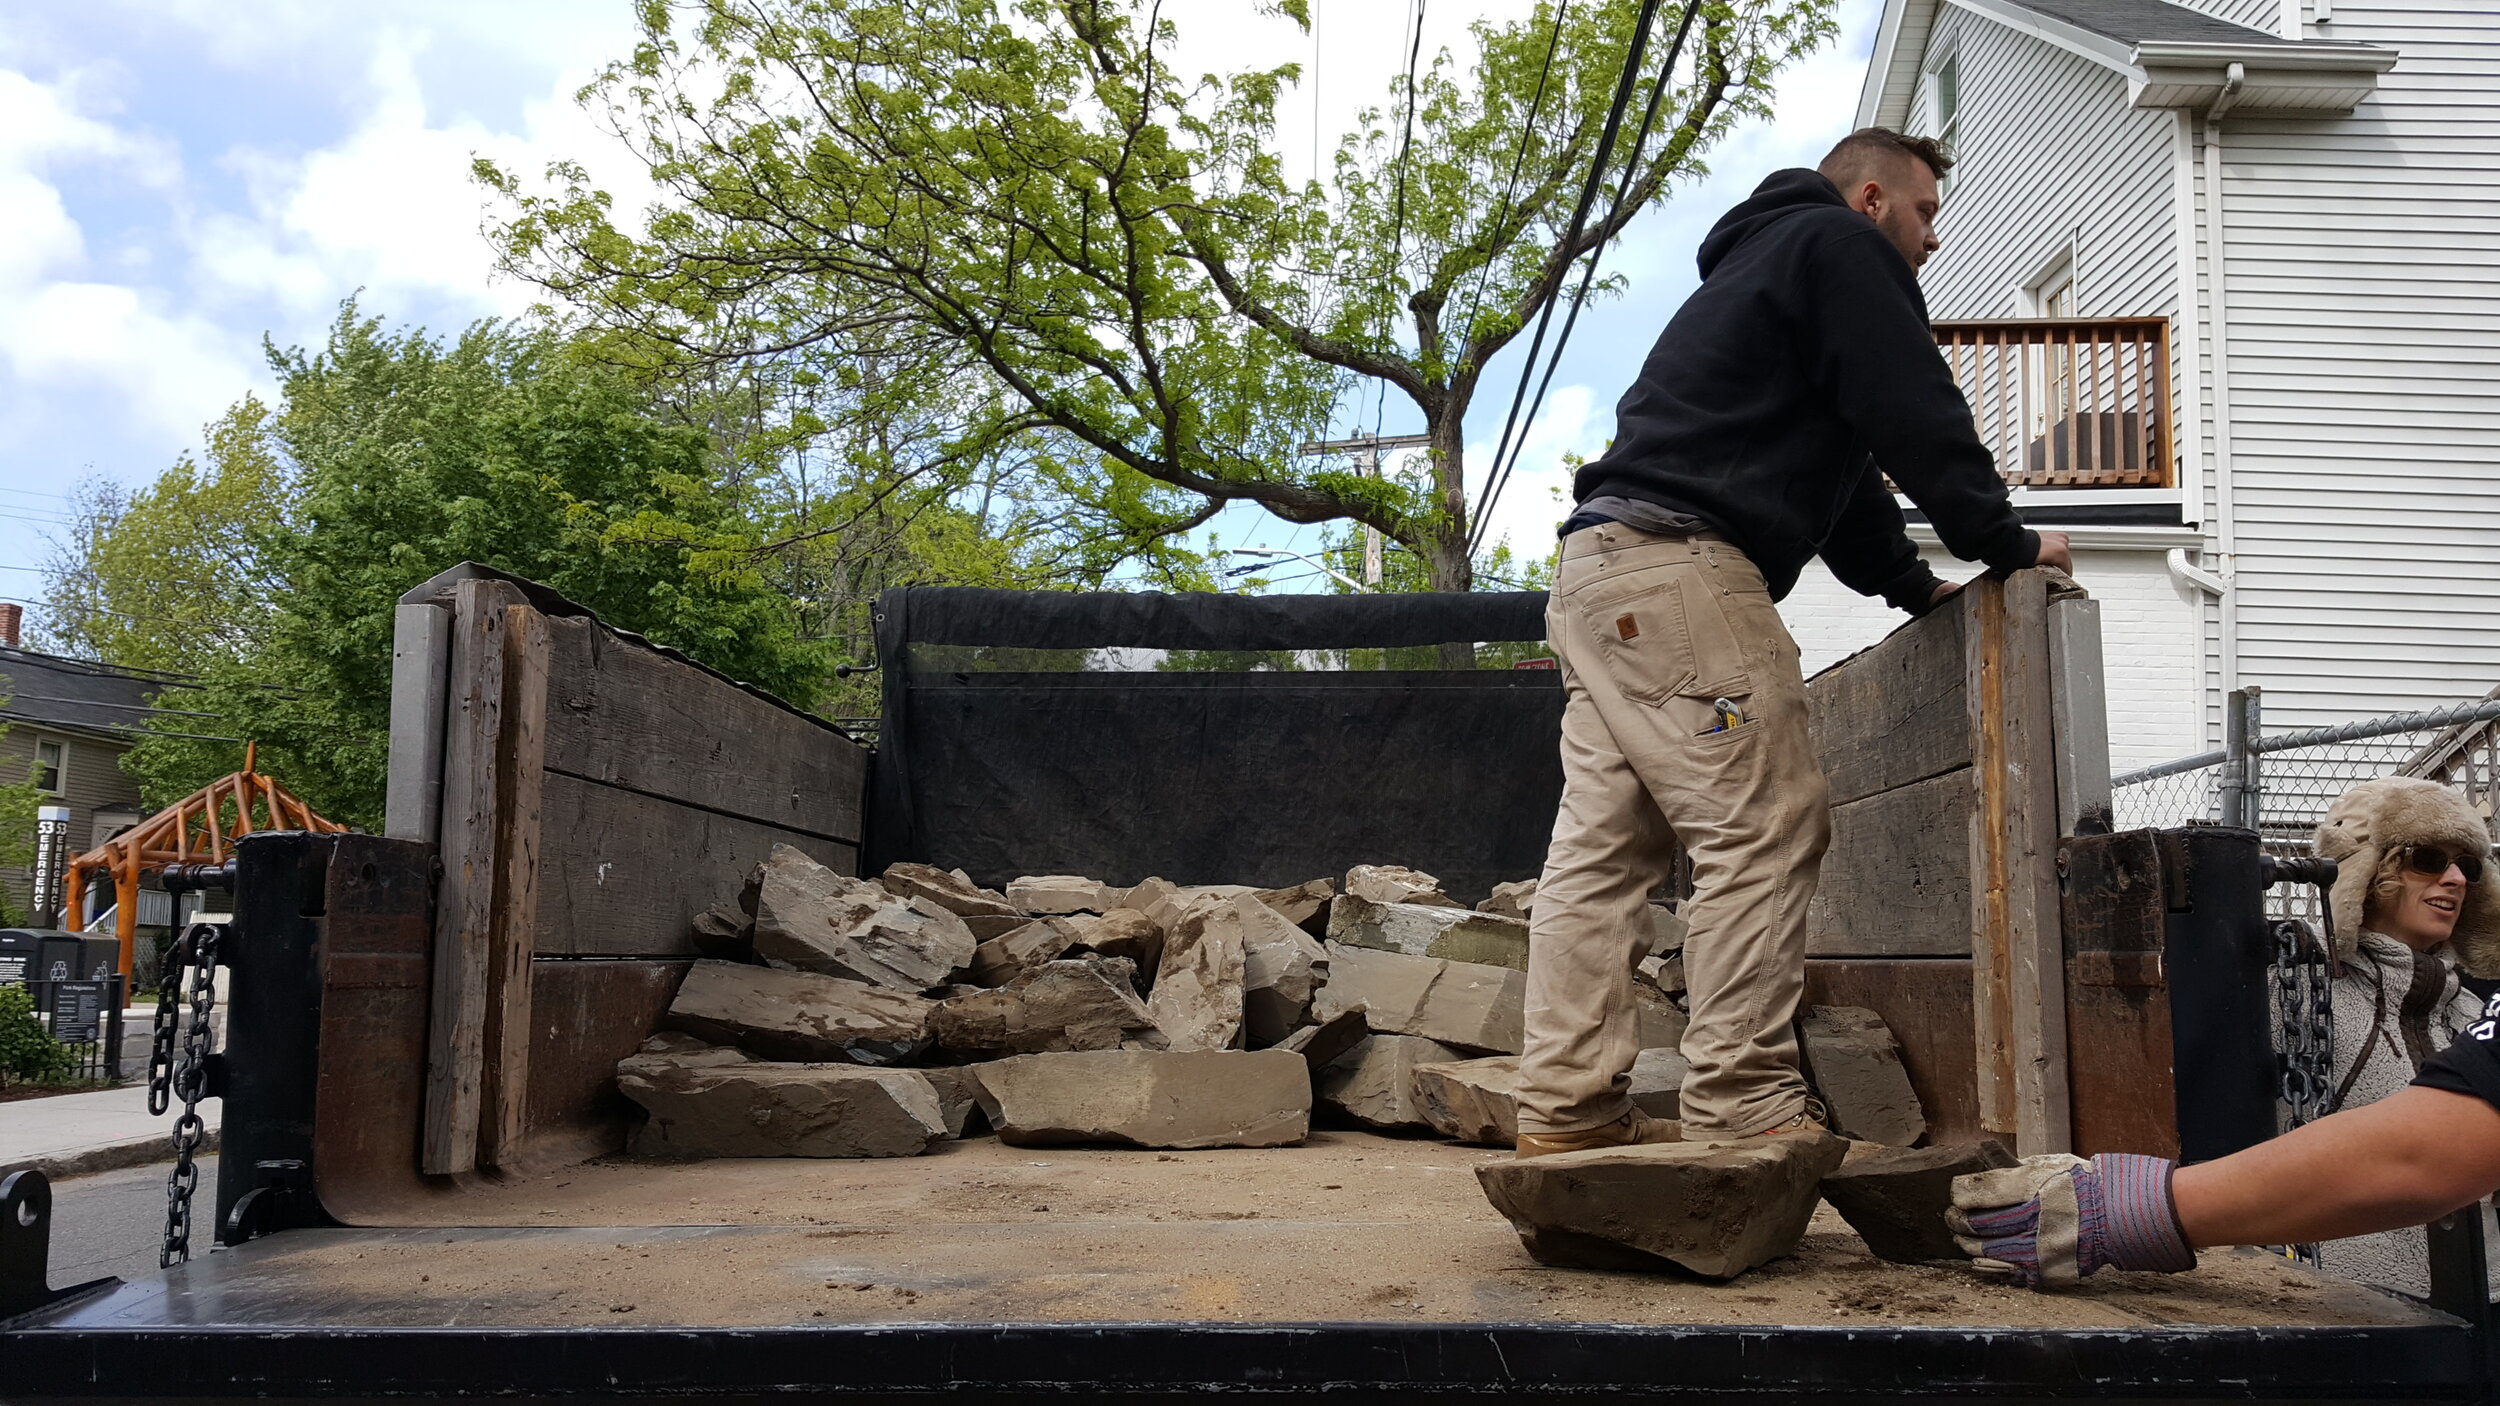 Salvaged stones en route. Thanks to Groundwork Somerville volunteers who came to our rescue.